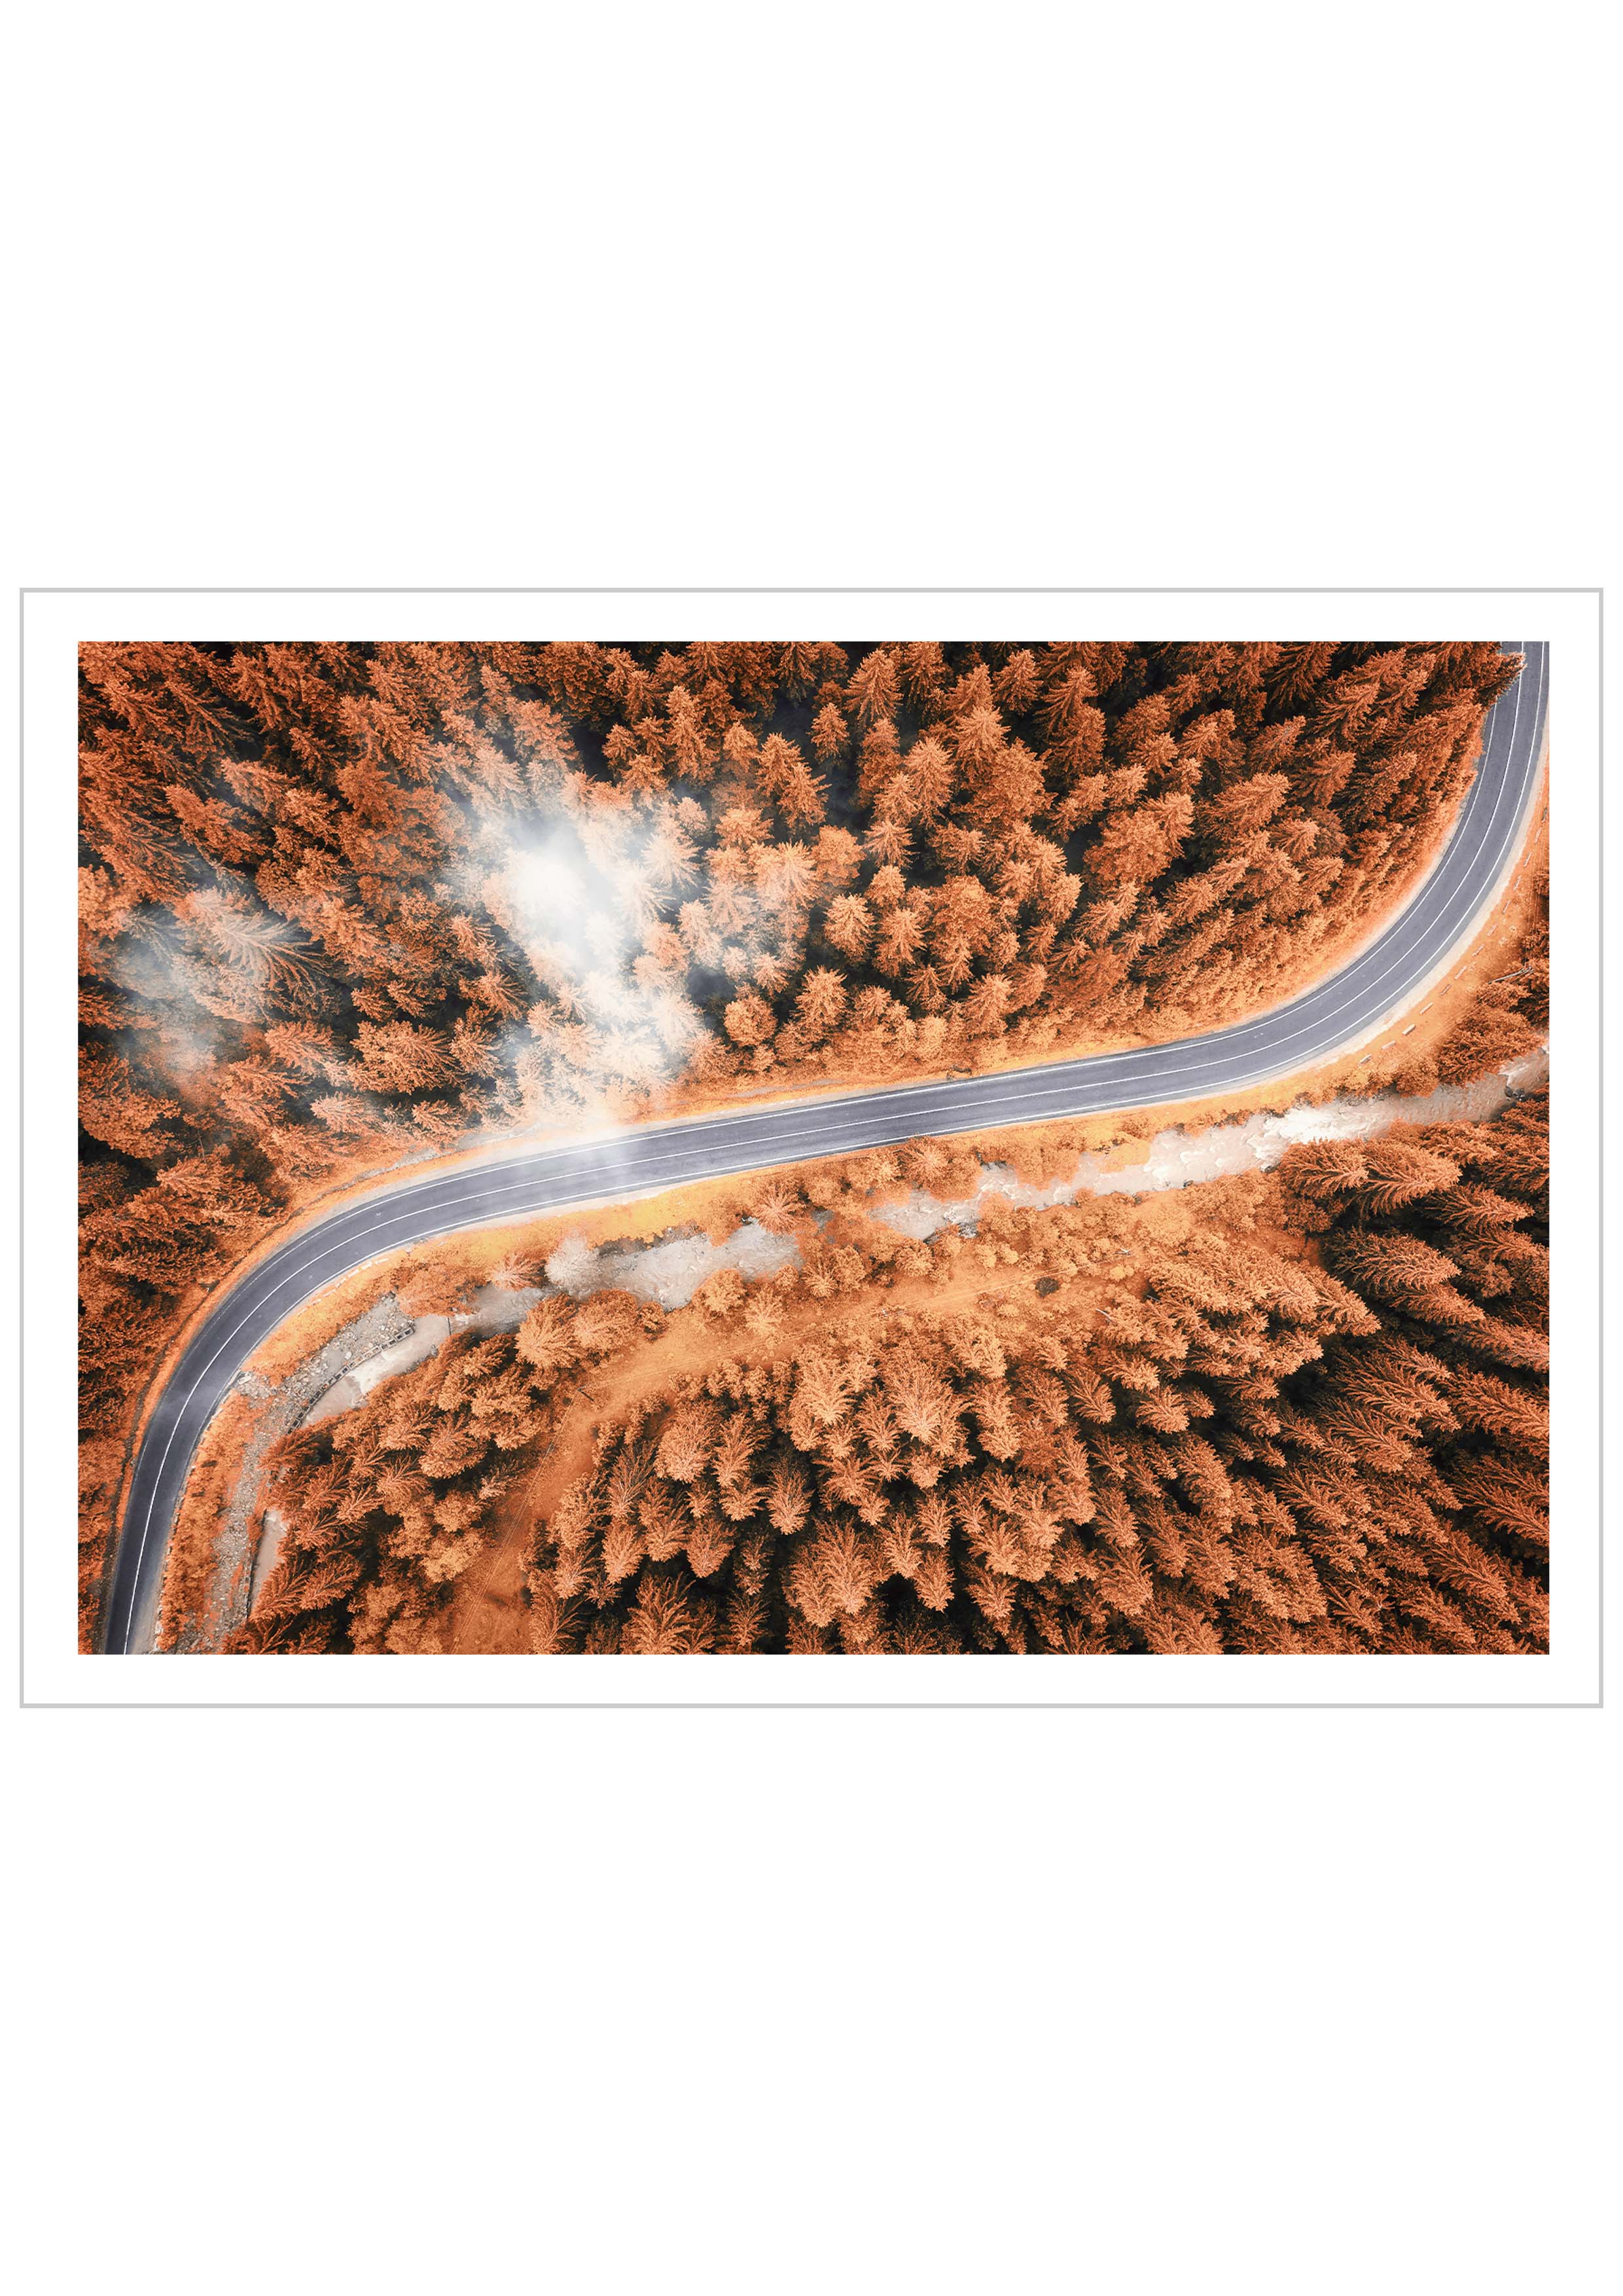 Aerial photography View Of A Pine Forest Road in Autumn